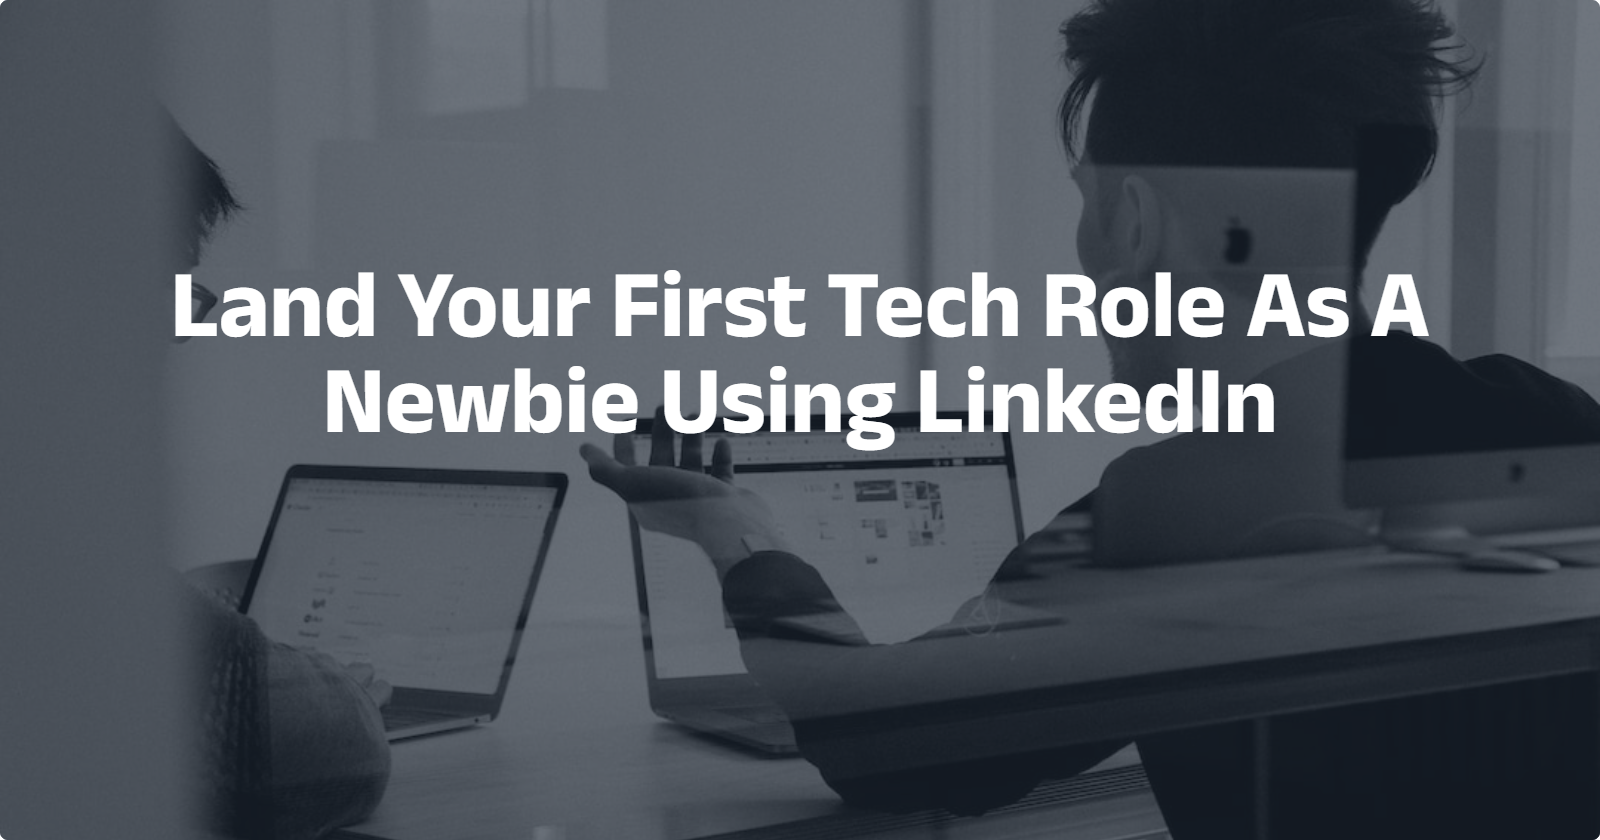 Land Your First Tech Role As A Newbie Using LinkedIn